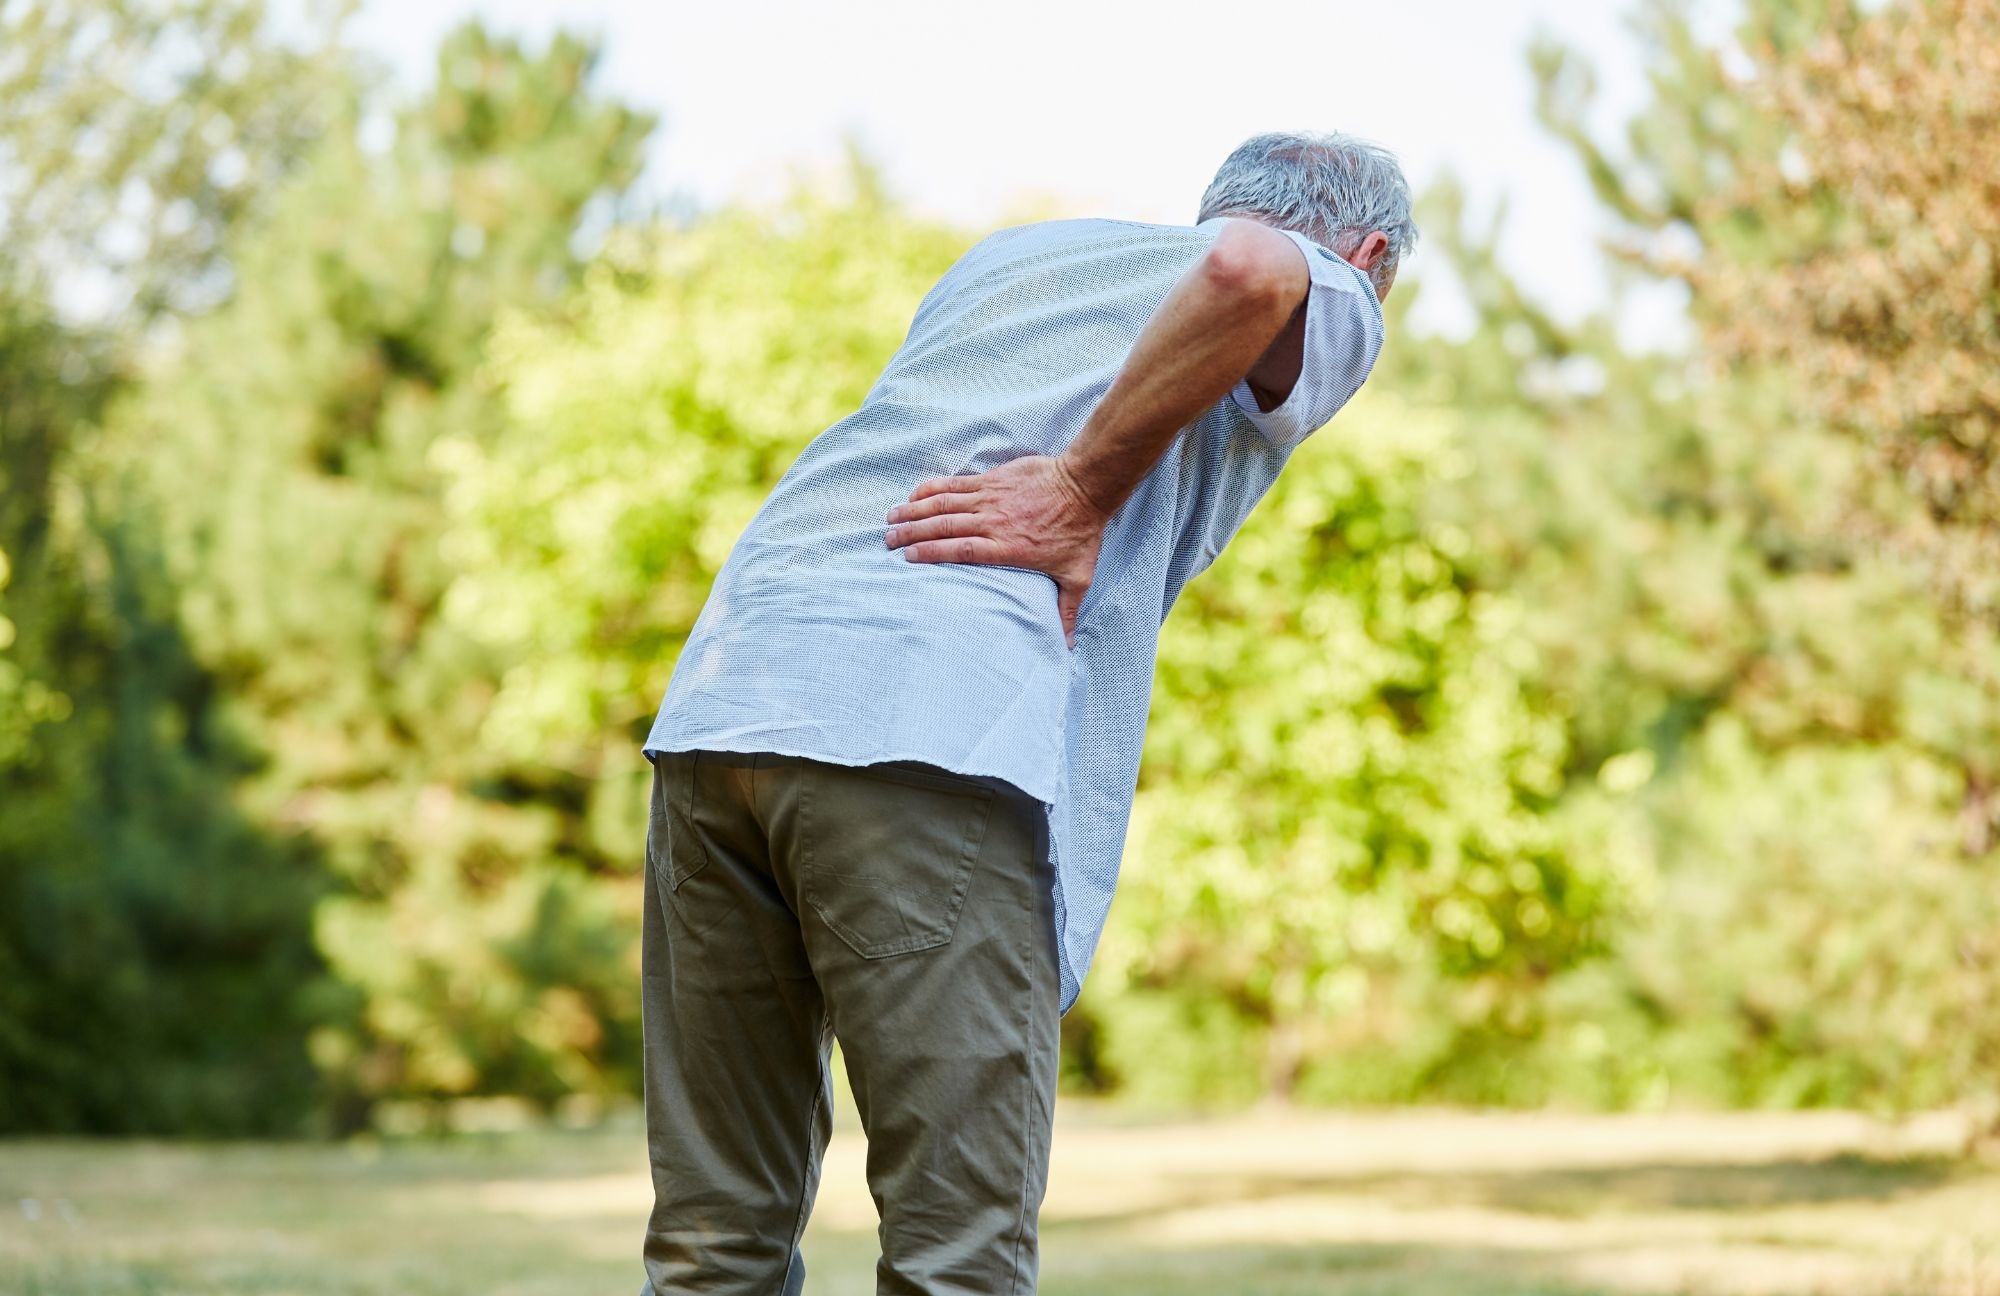 Proven Ways to Treat and Prevent Lower Back Pain From Golf Without Painkillers, Injections, or Surgery